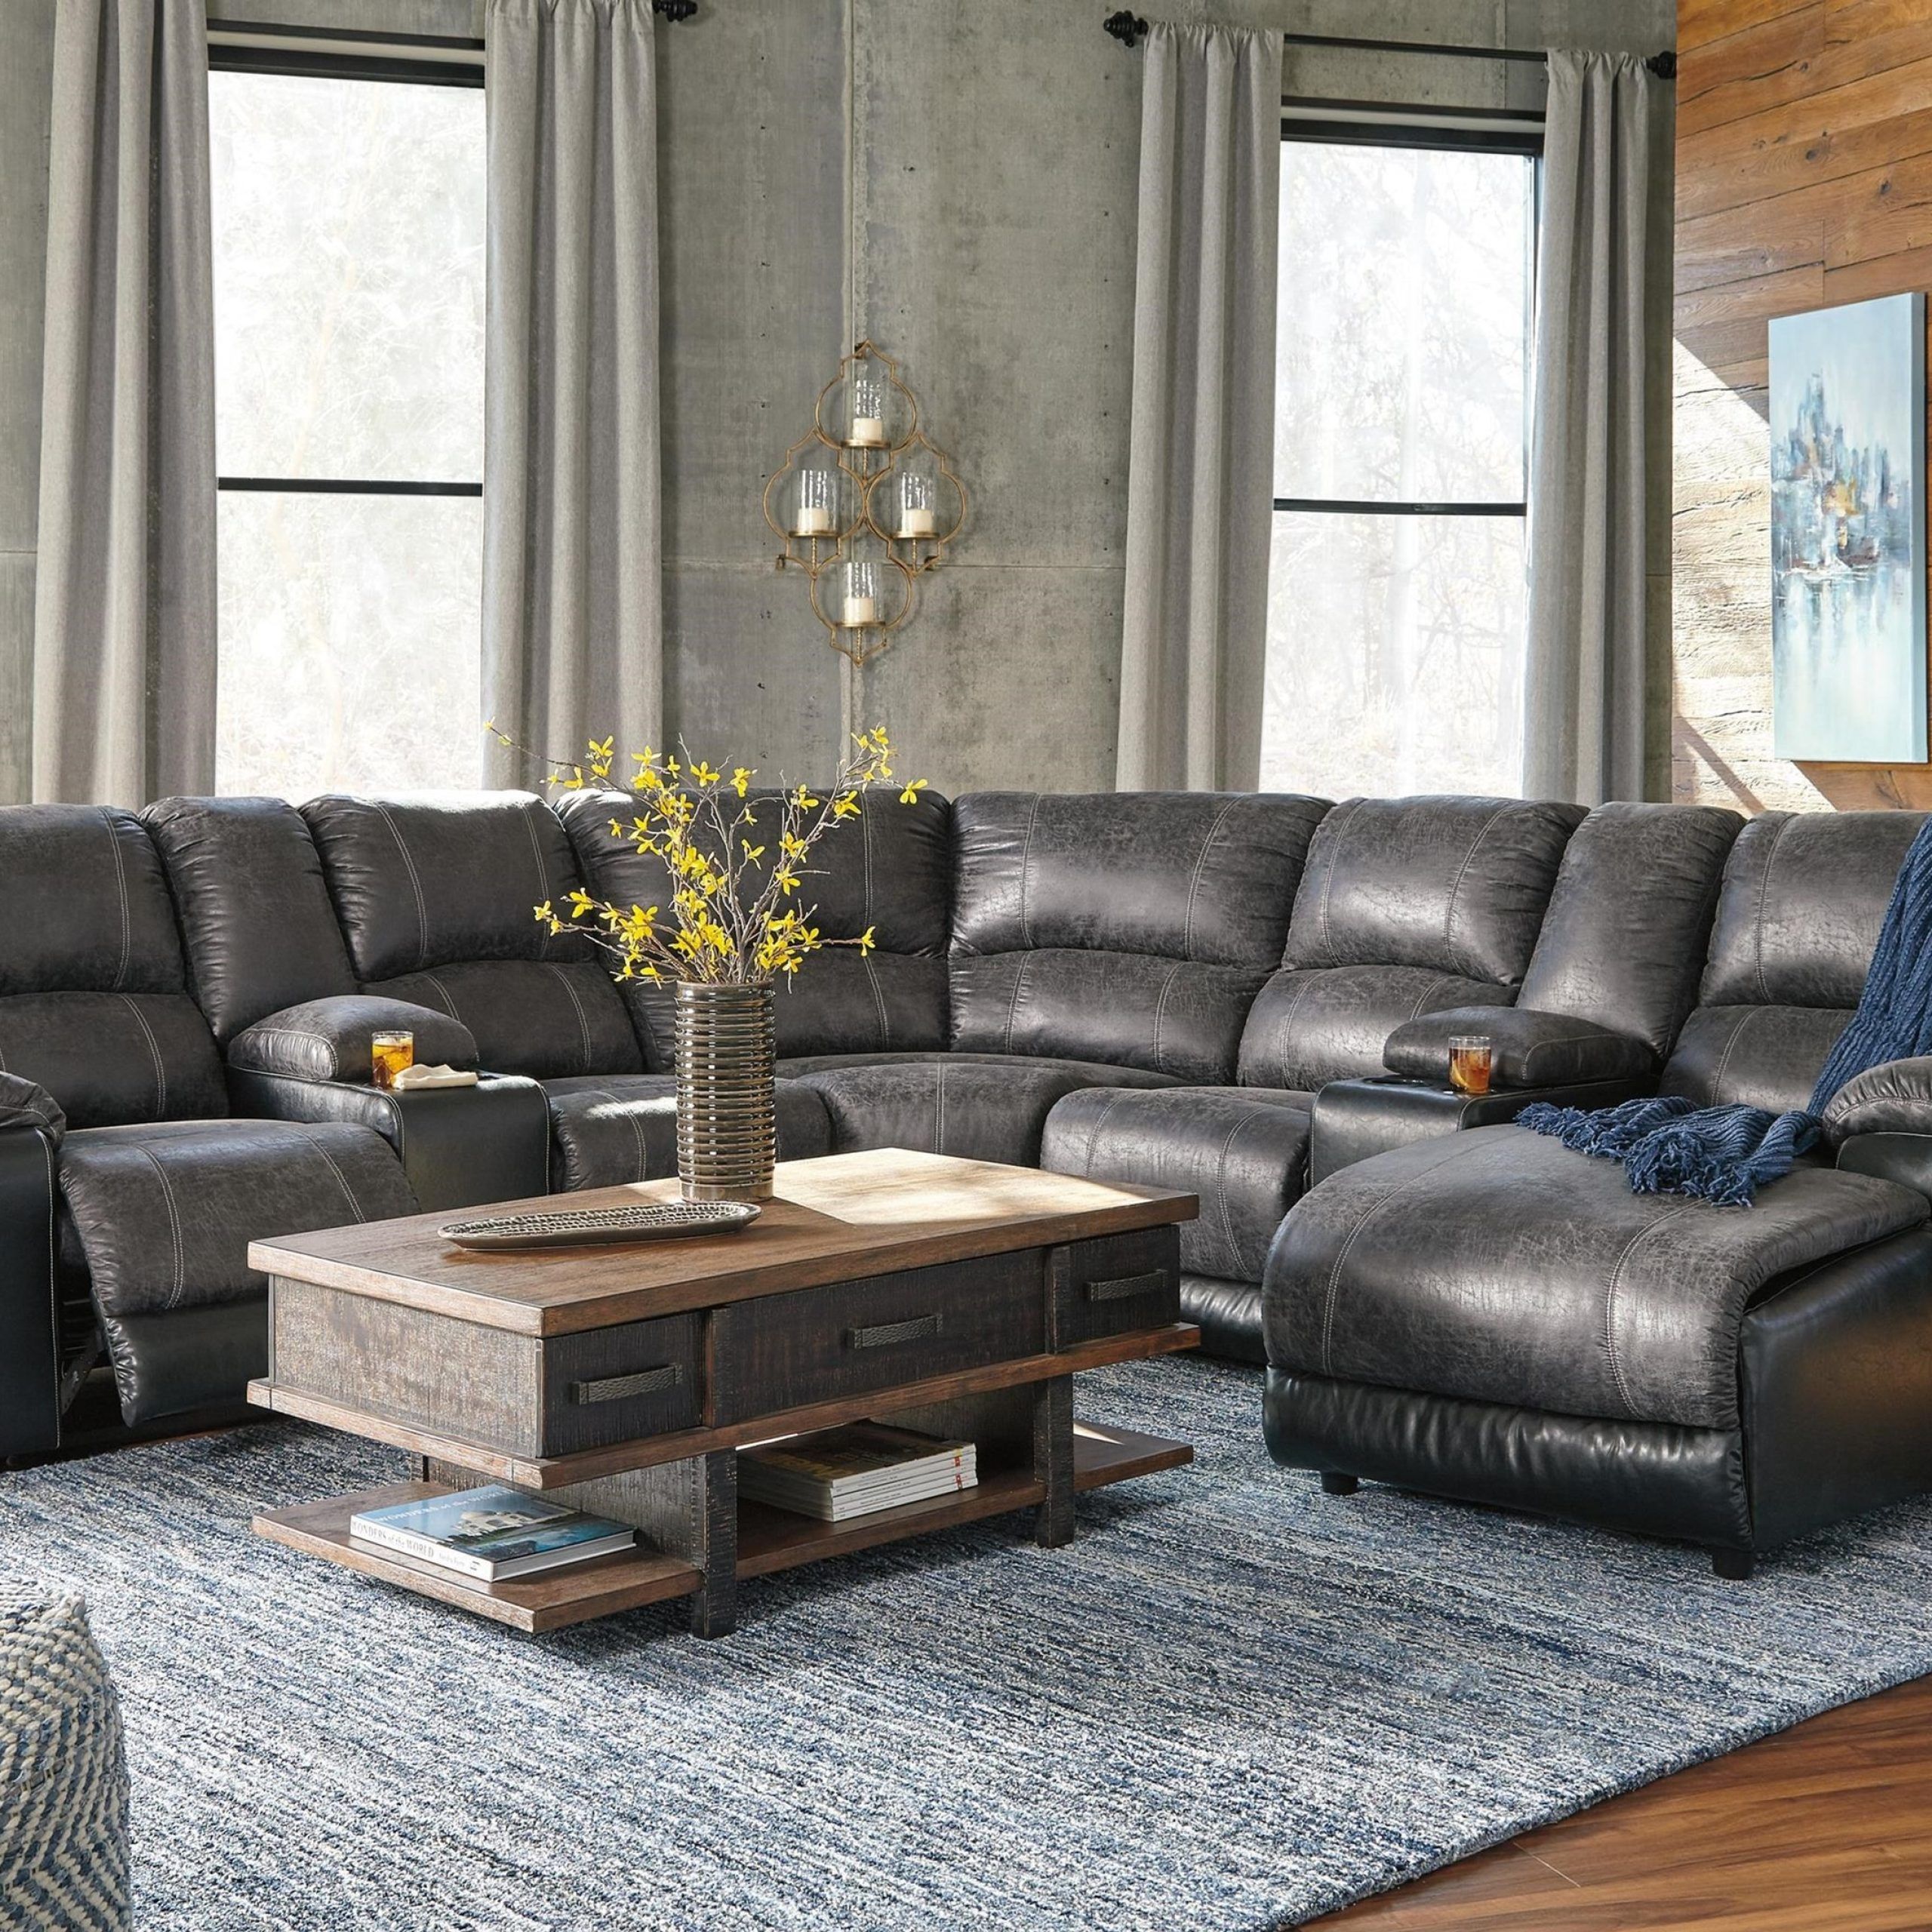 Signature Designashley Nantahala Faux Leather Reclining Sectional Pertaining To Faux Leather Sectional Sofa Sets (View 21 of 21)